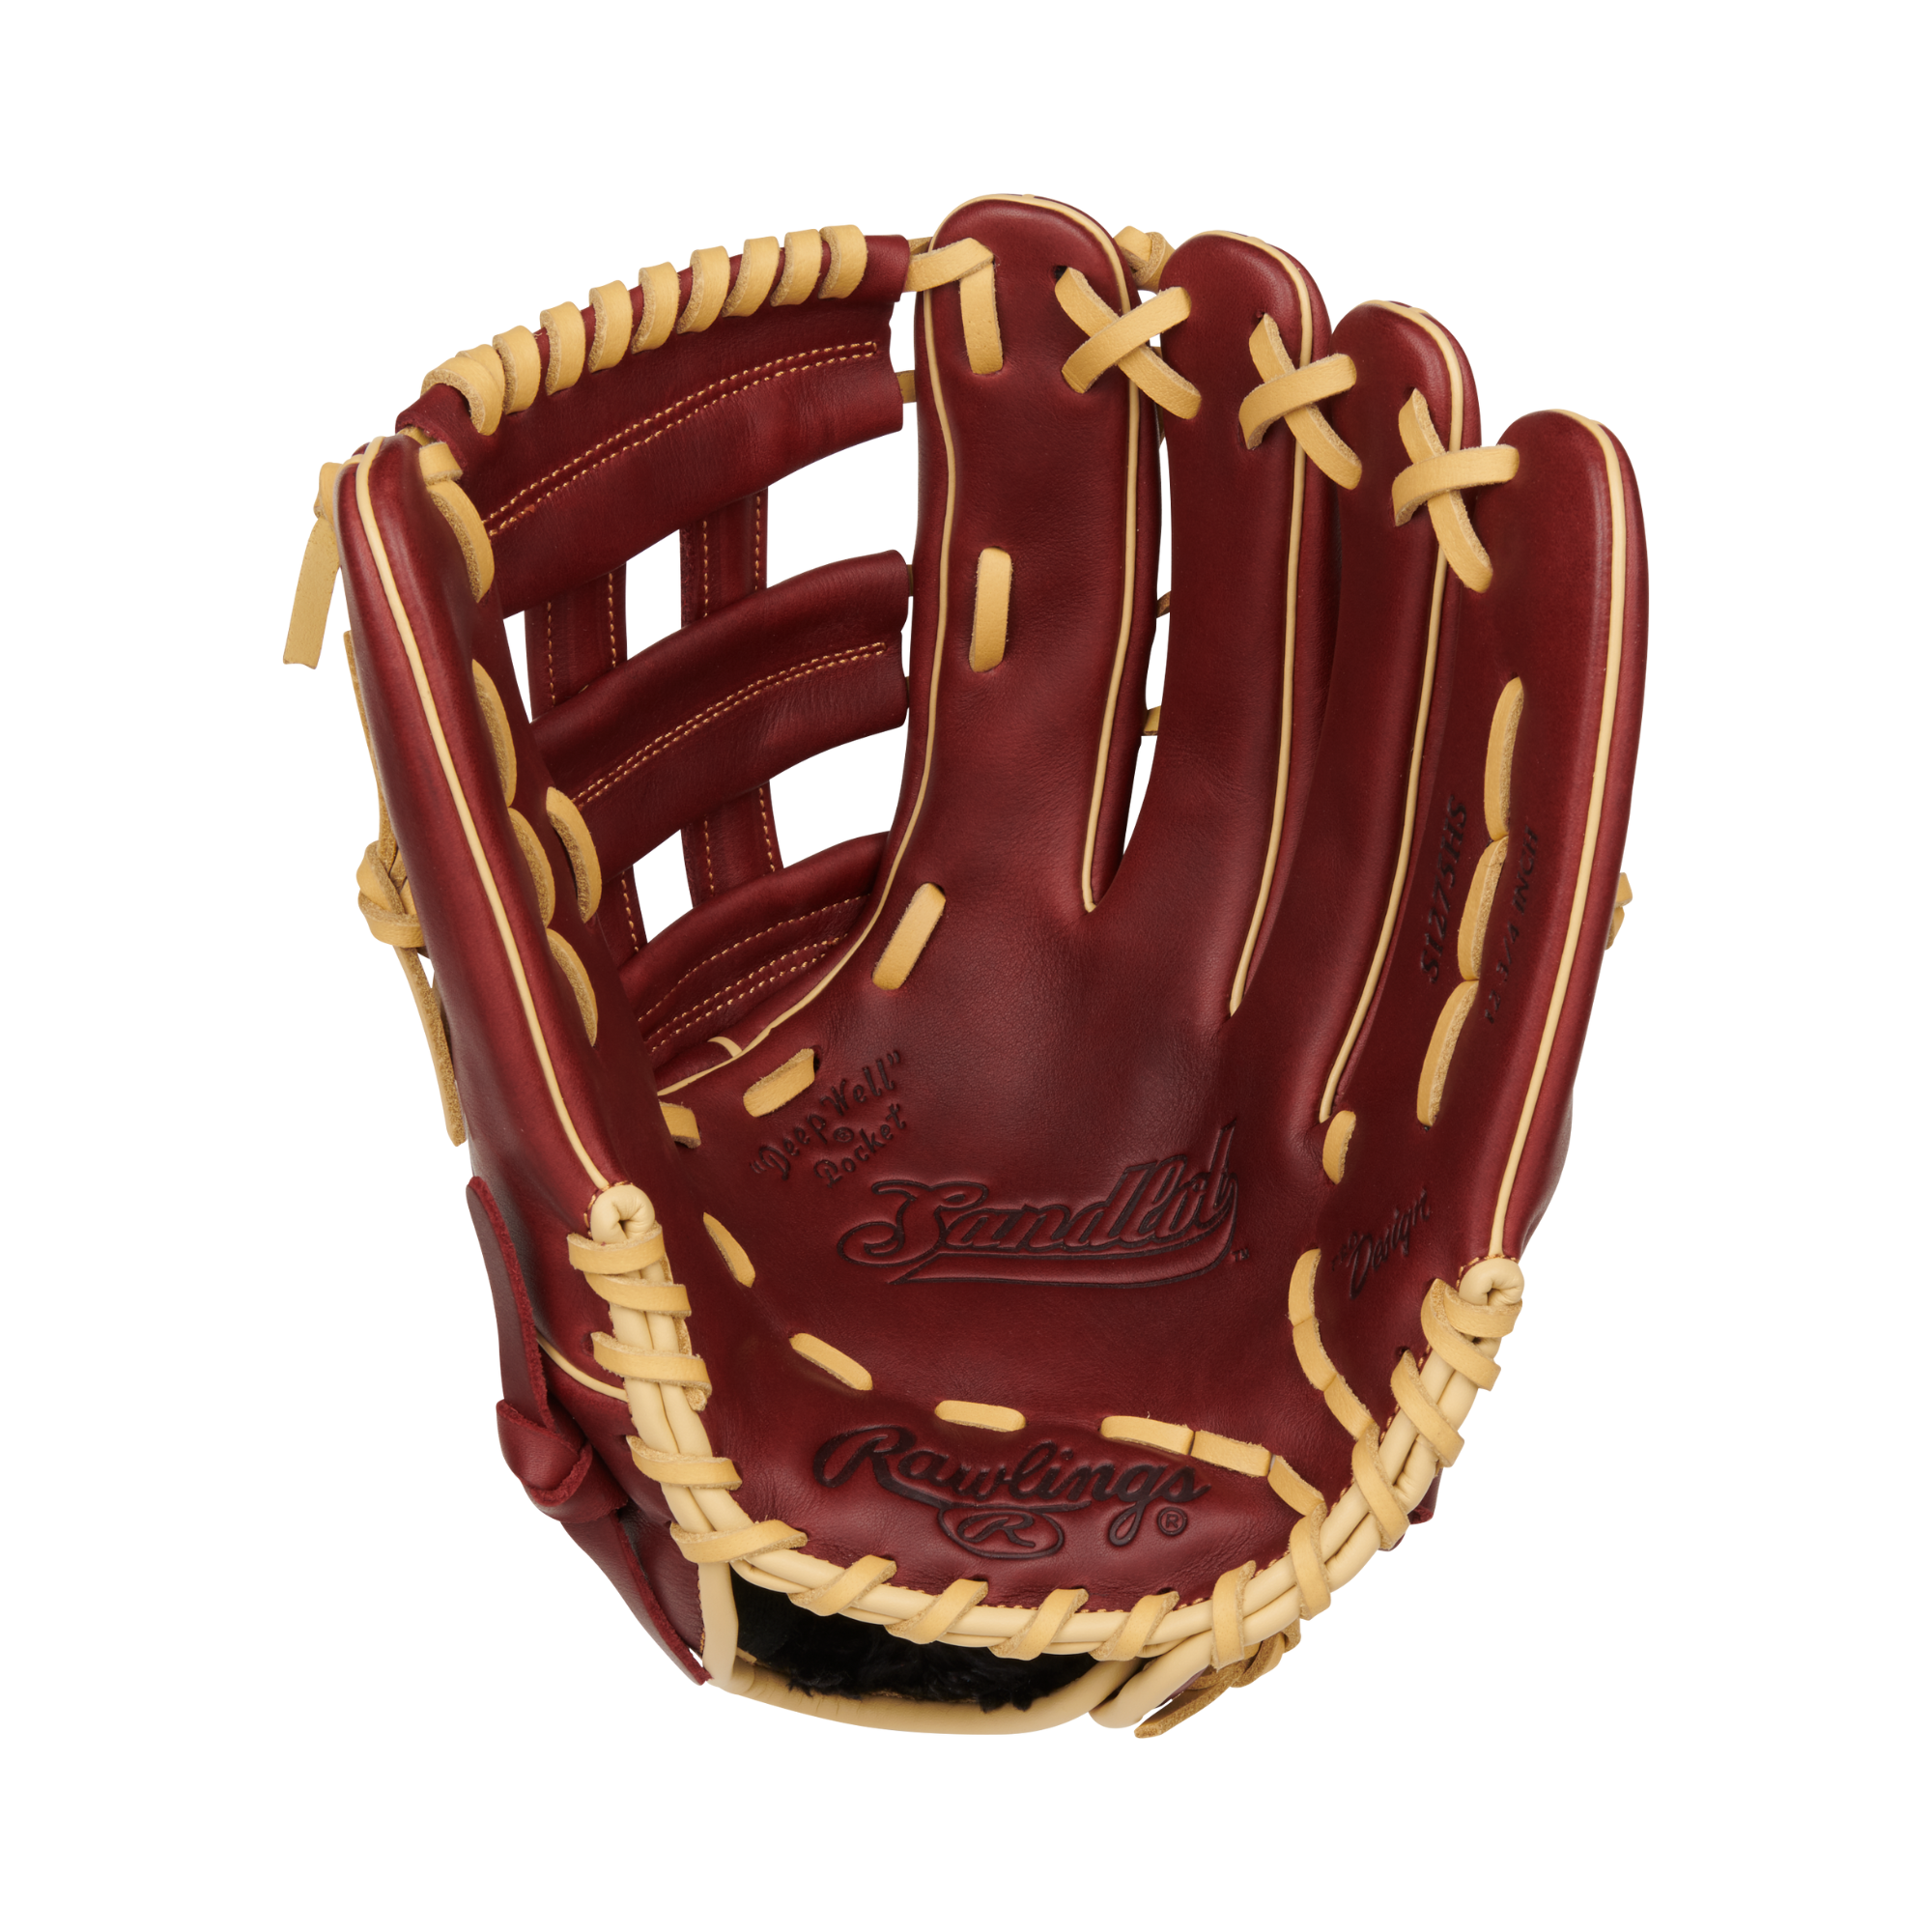 Rawlings Sandlot Series Outfield Glove 12.75"LHT